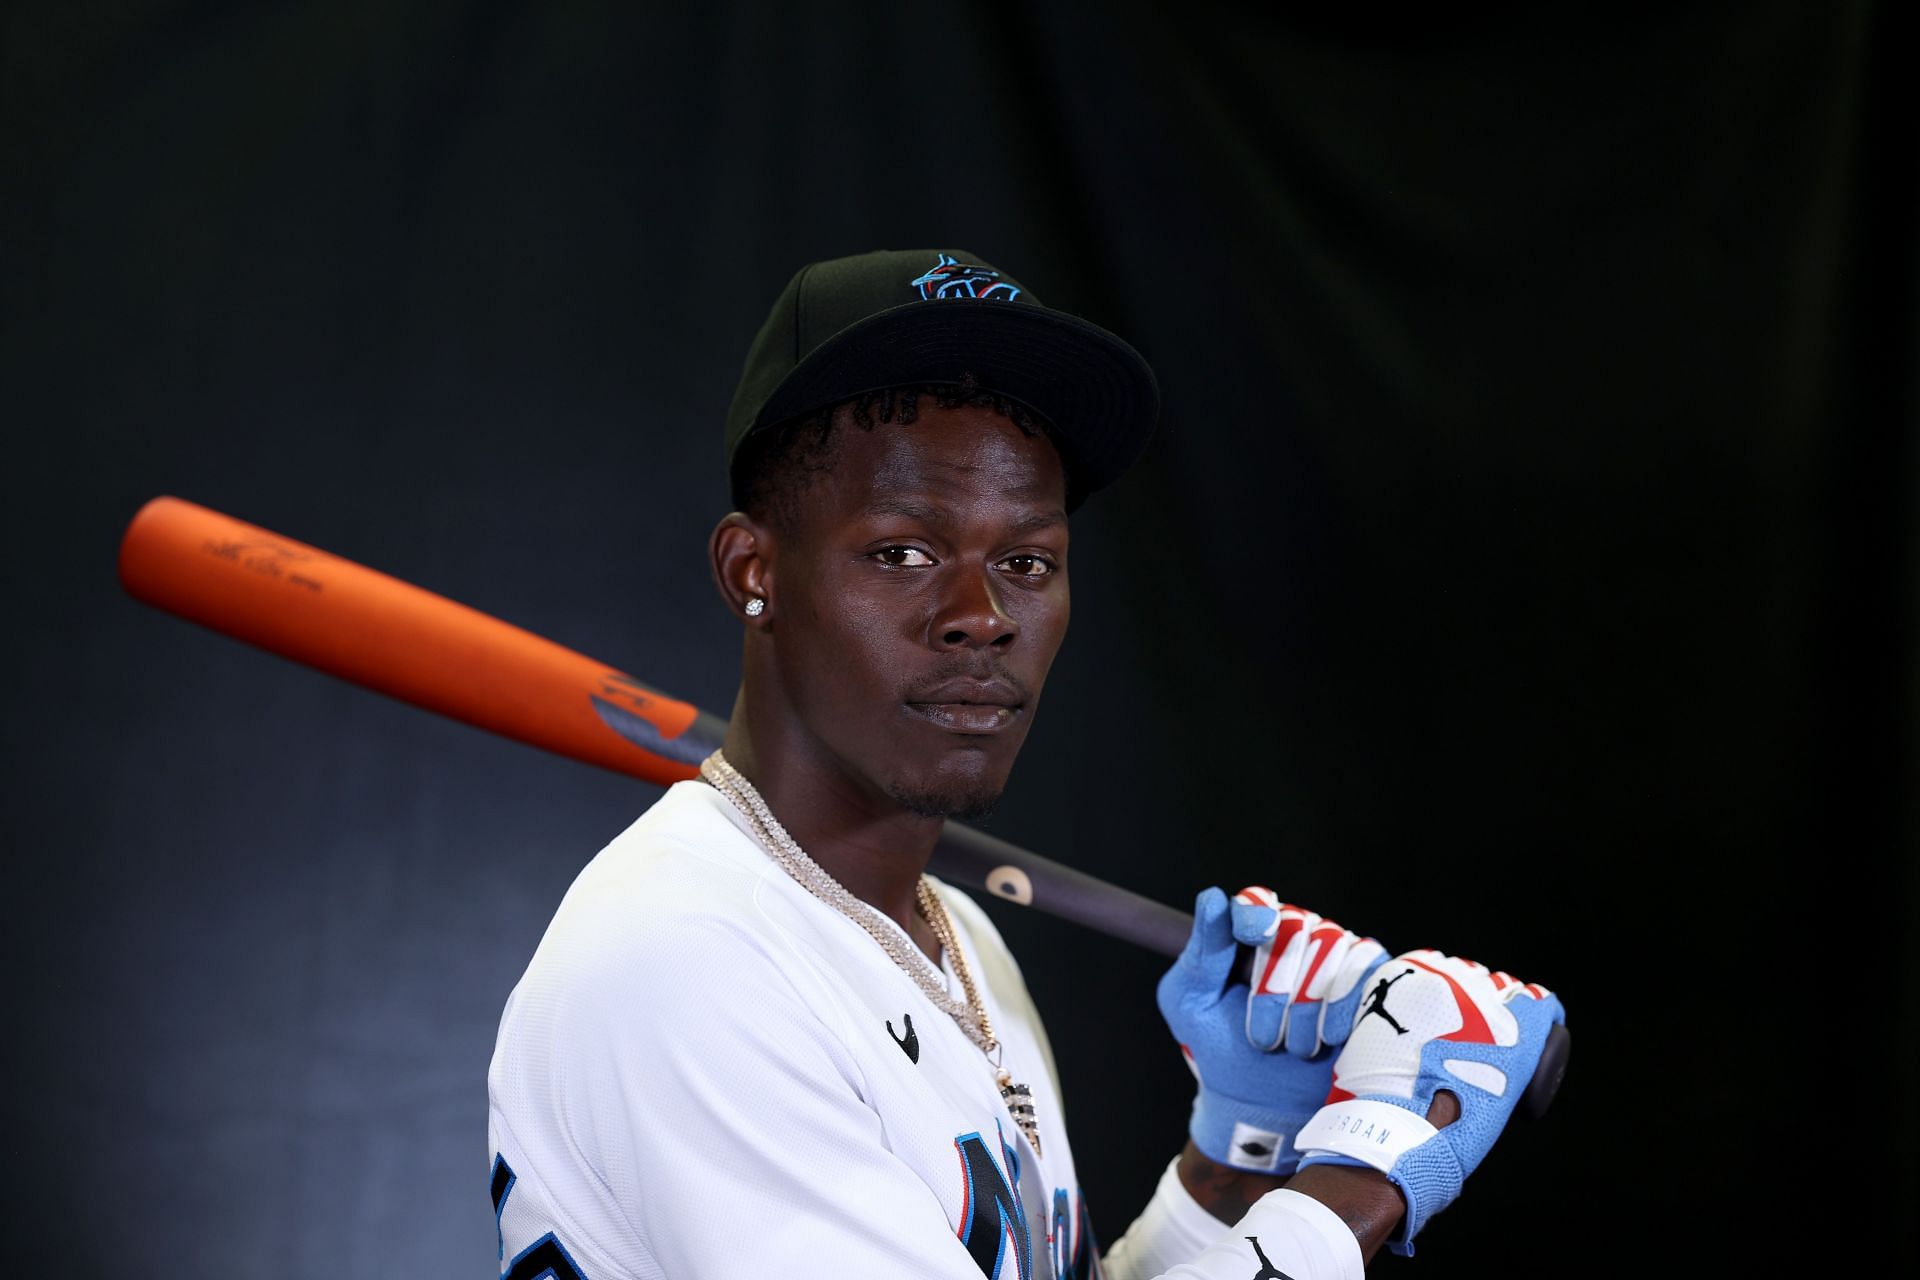 Miami Marlins starlet Jazz Chisholm aims for the Golden Glove in